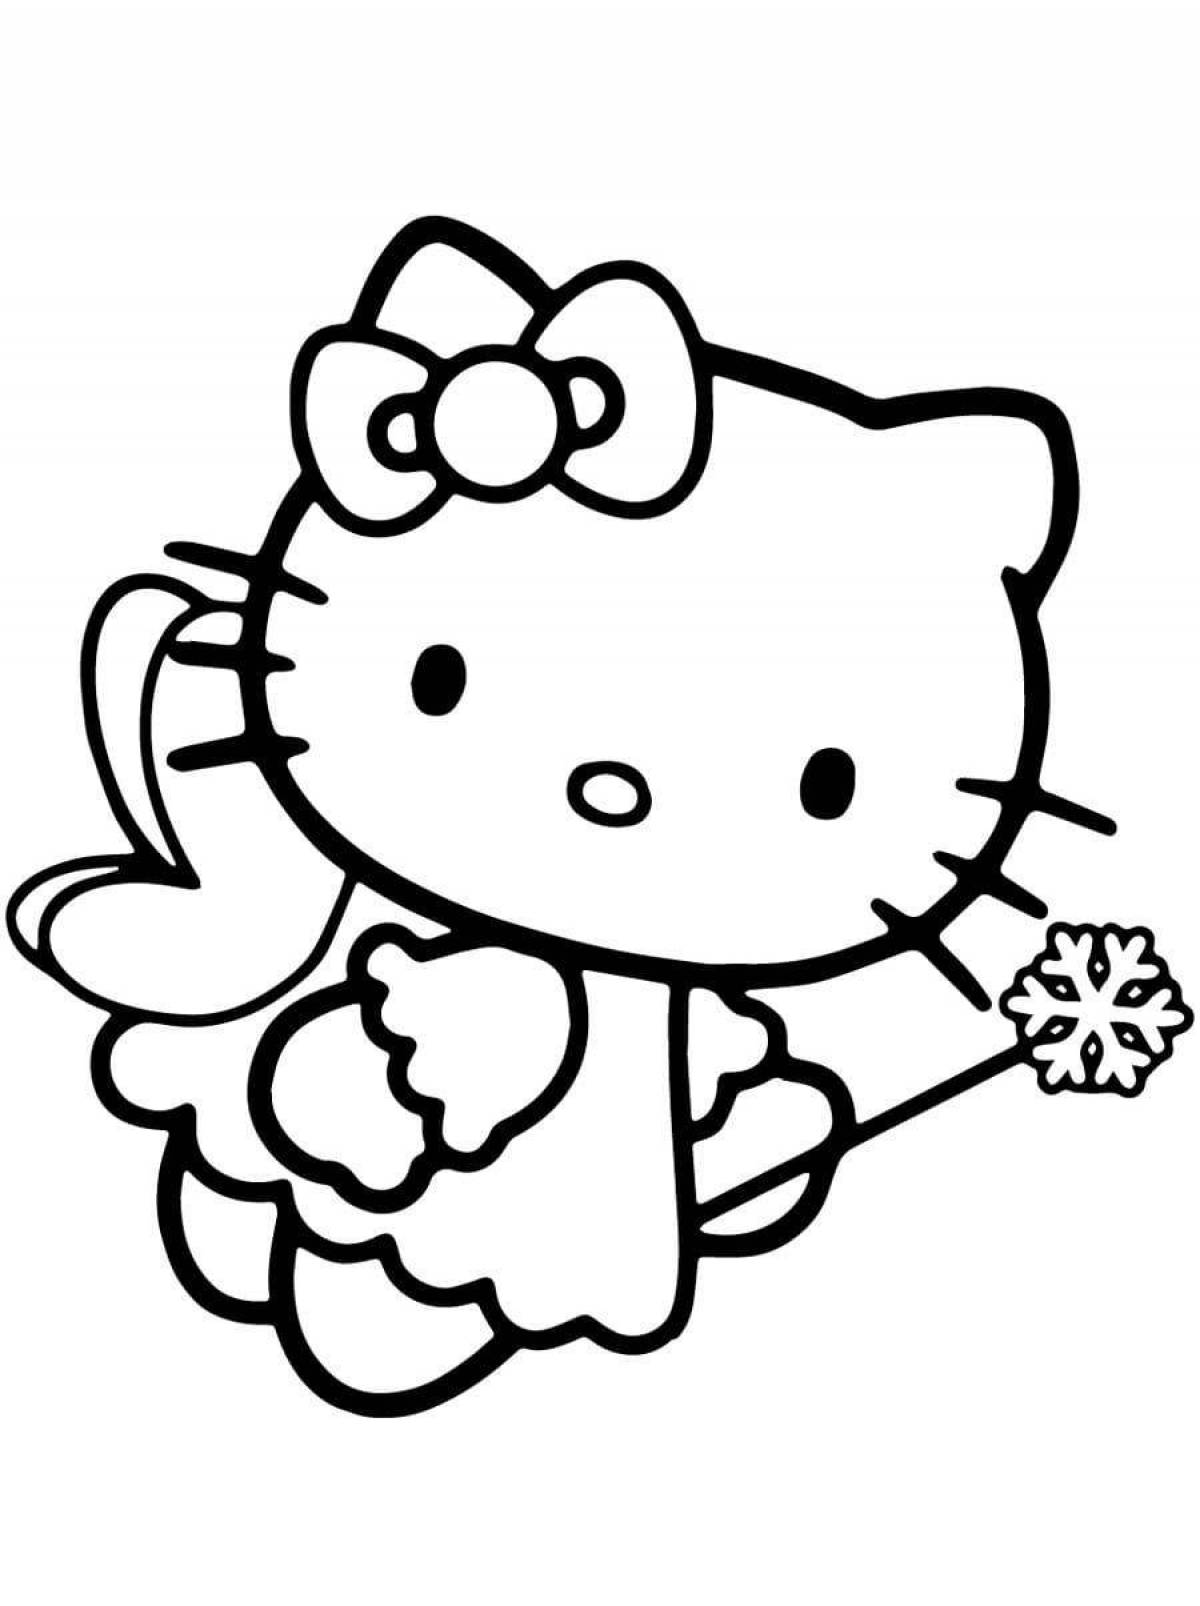 Exotic hallow kitty coloring page